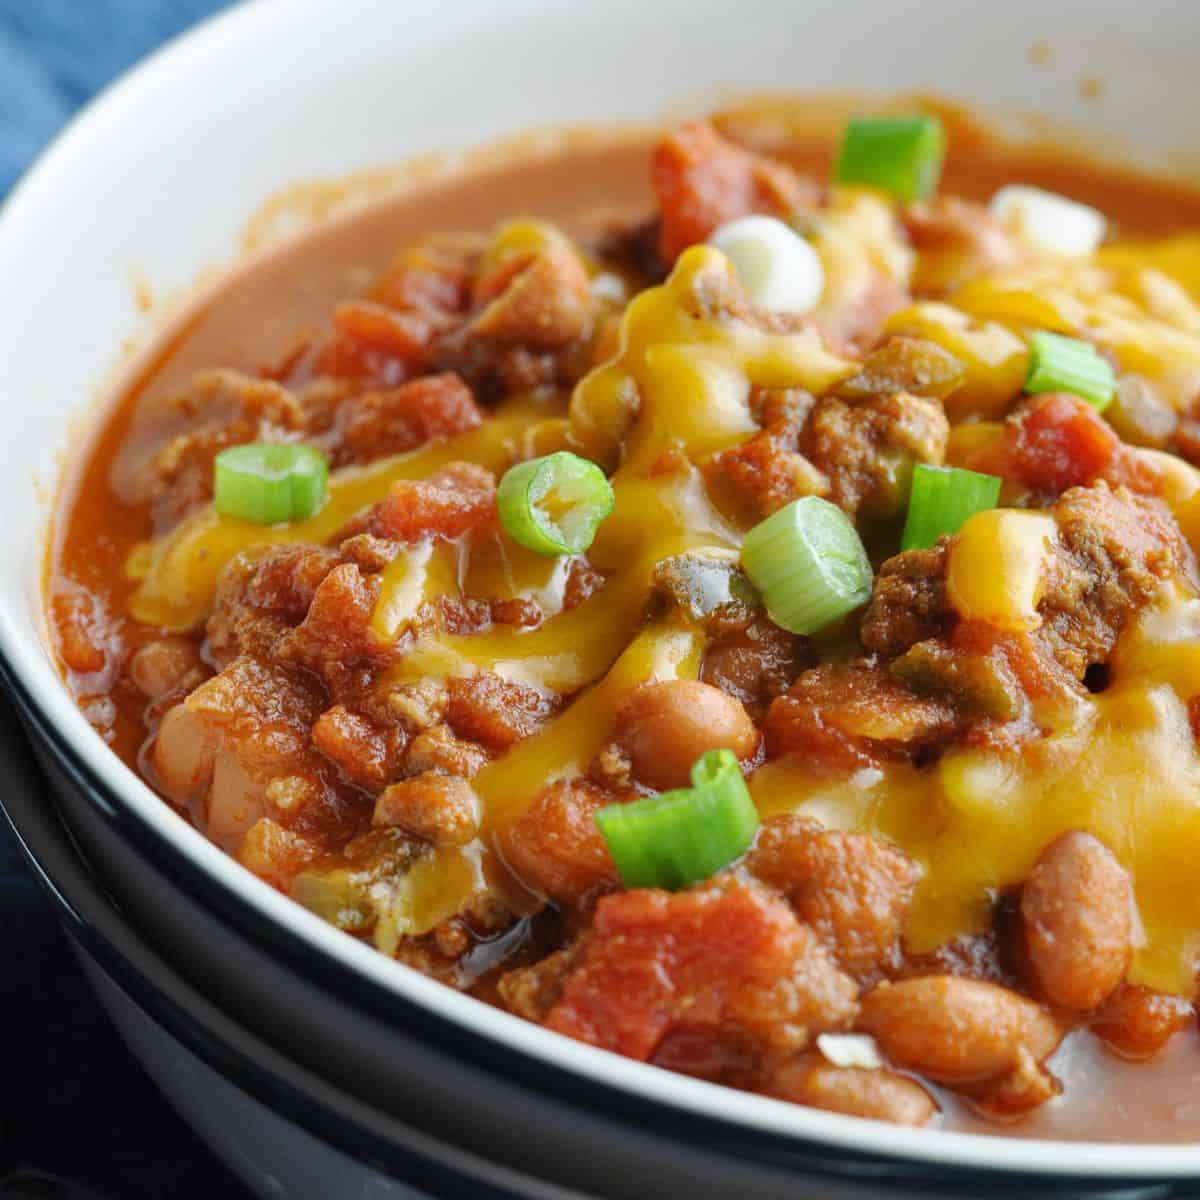 Slow Cooker White Beans - Spicy Southern Kitchen